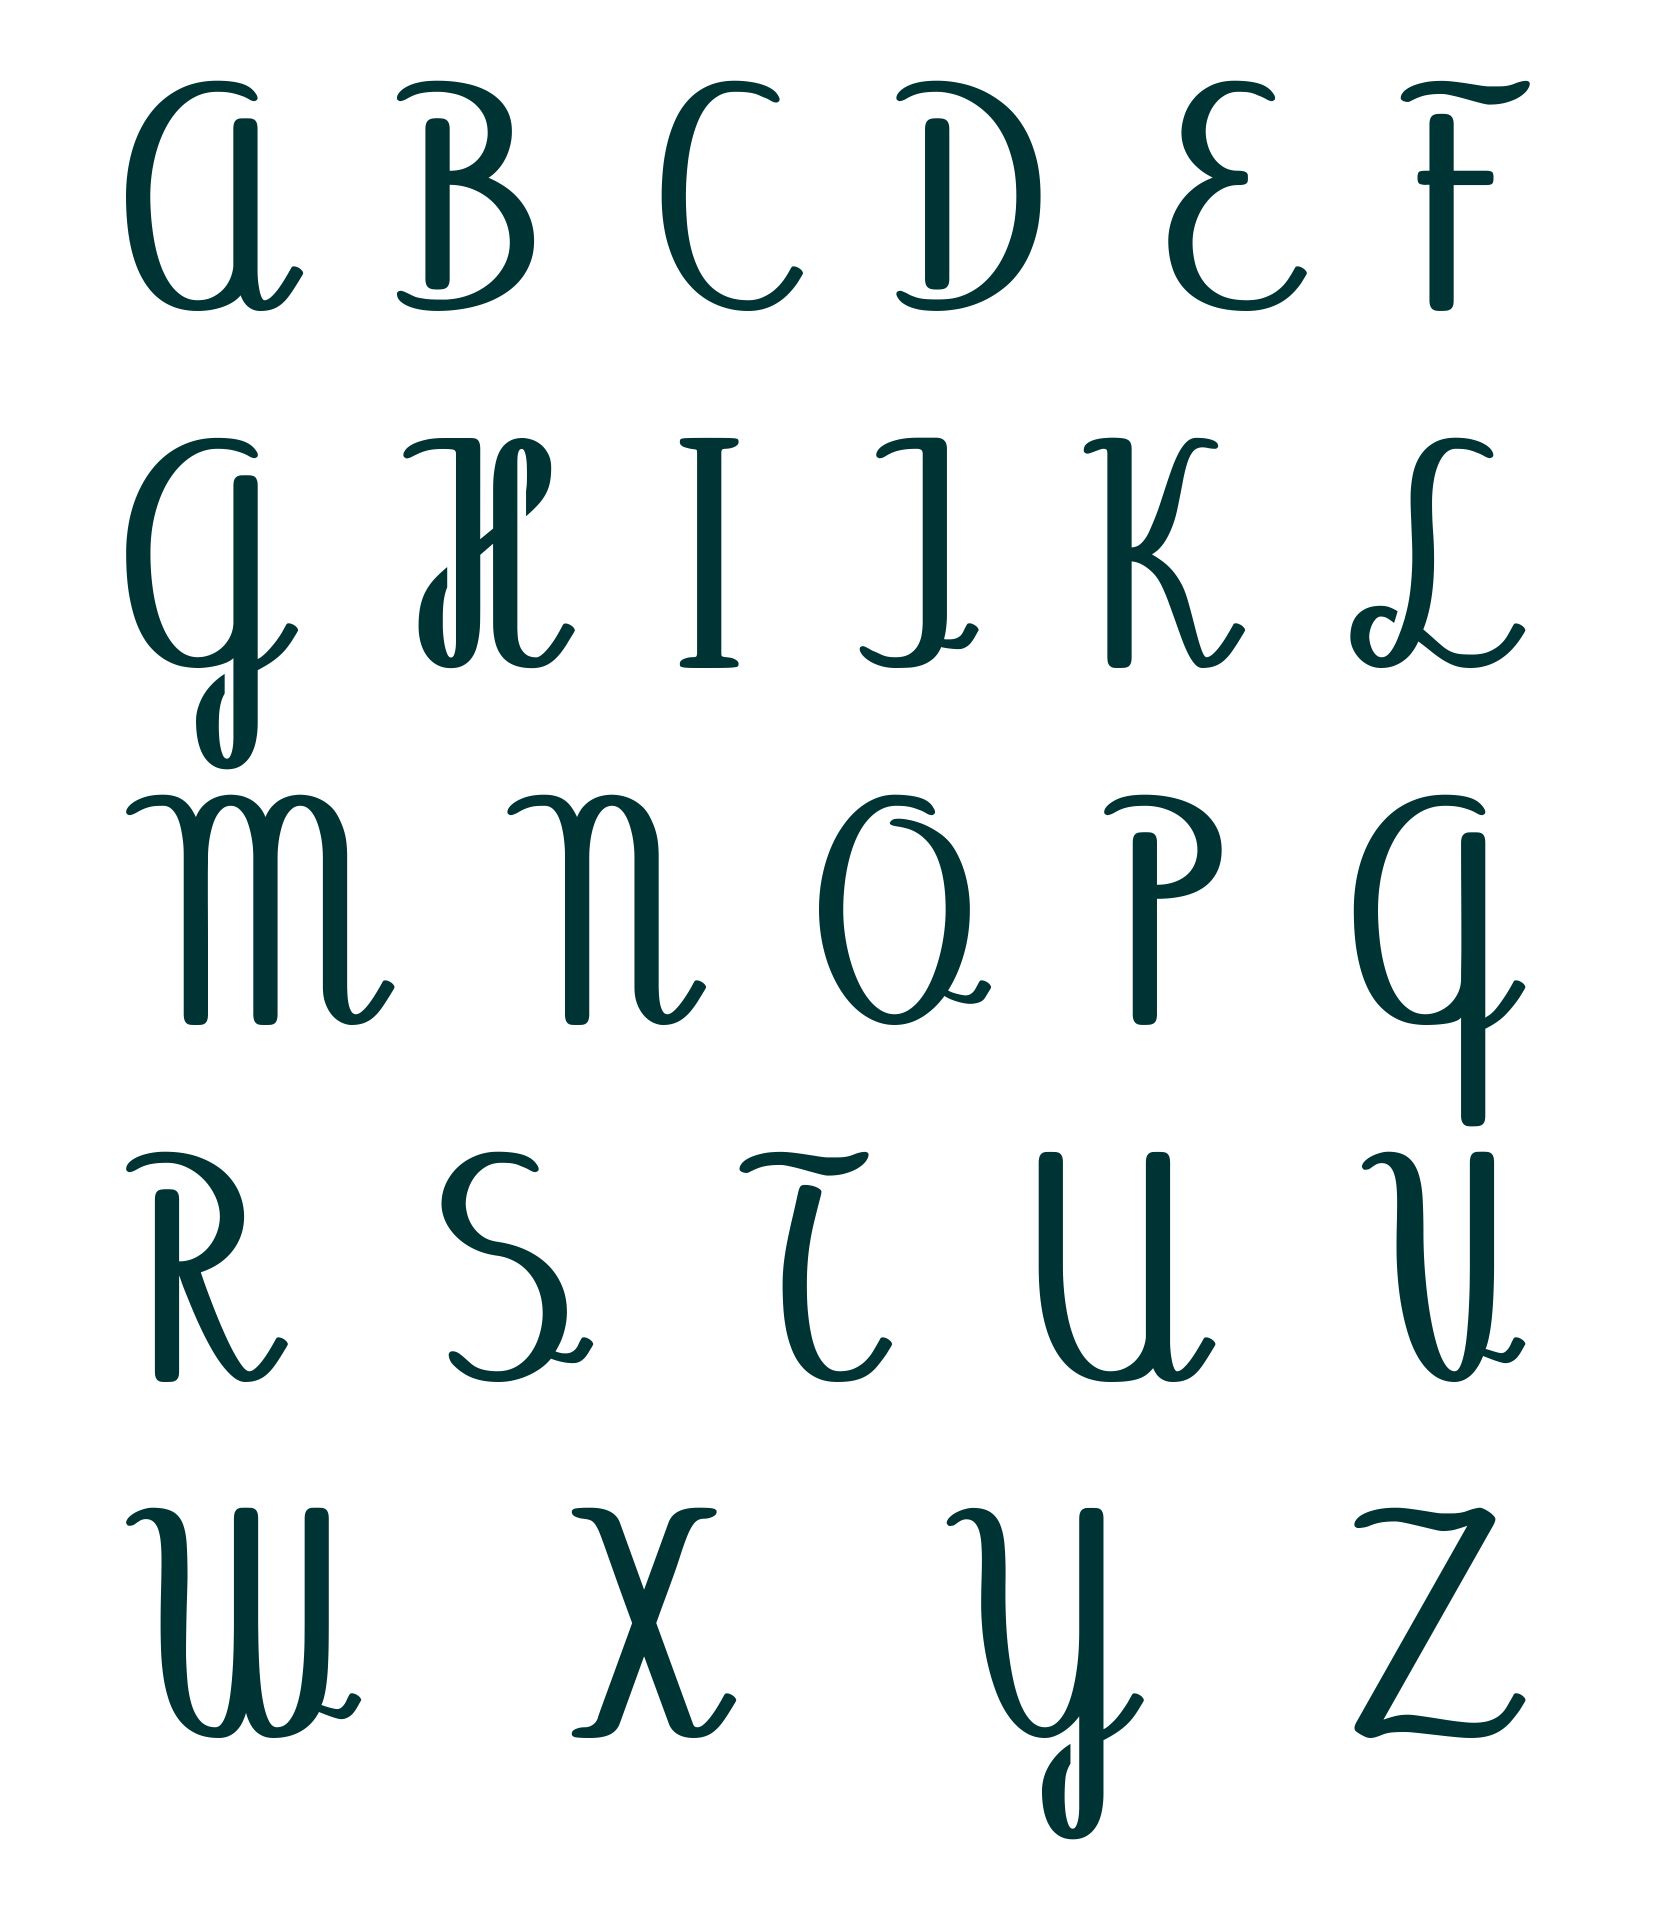 downloadable-free-printable-alphabet-stencils-templates-printable-letter-stencils-for-posters